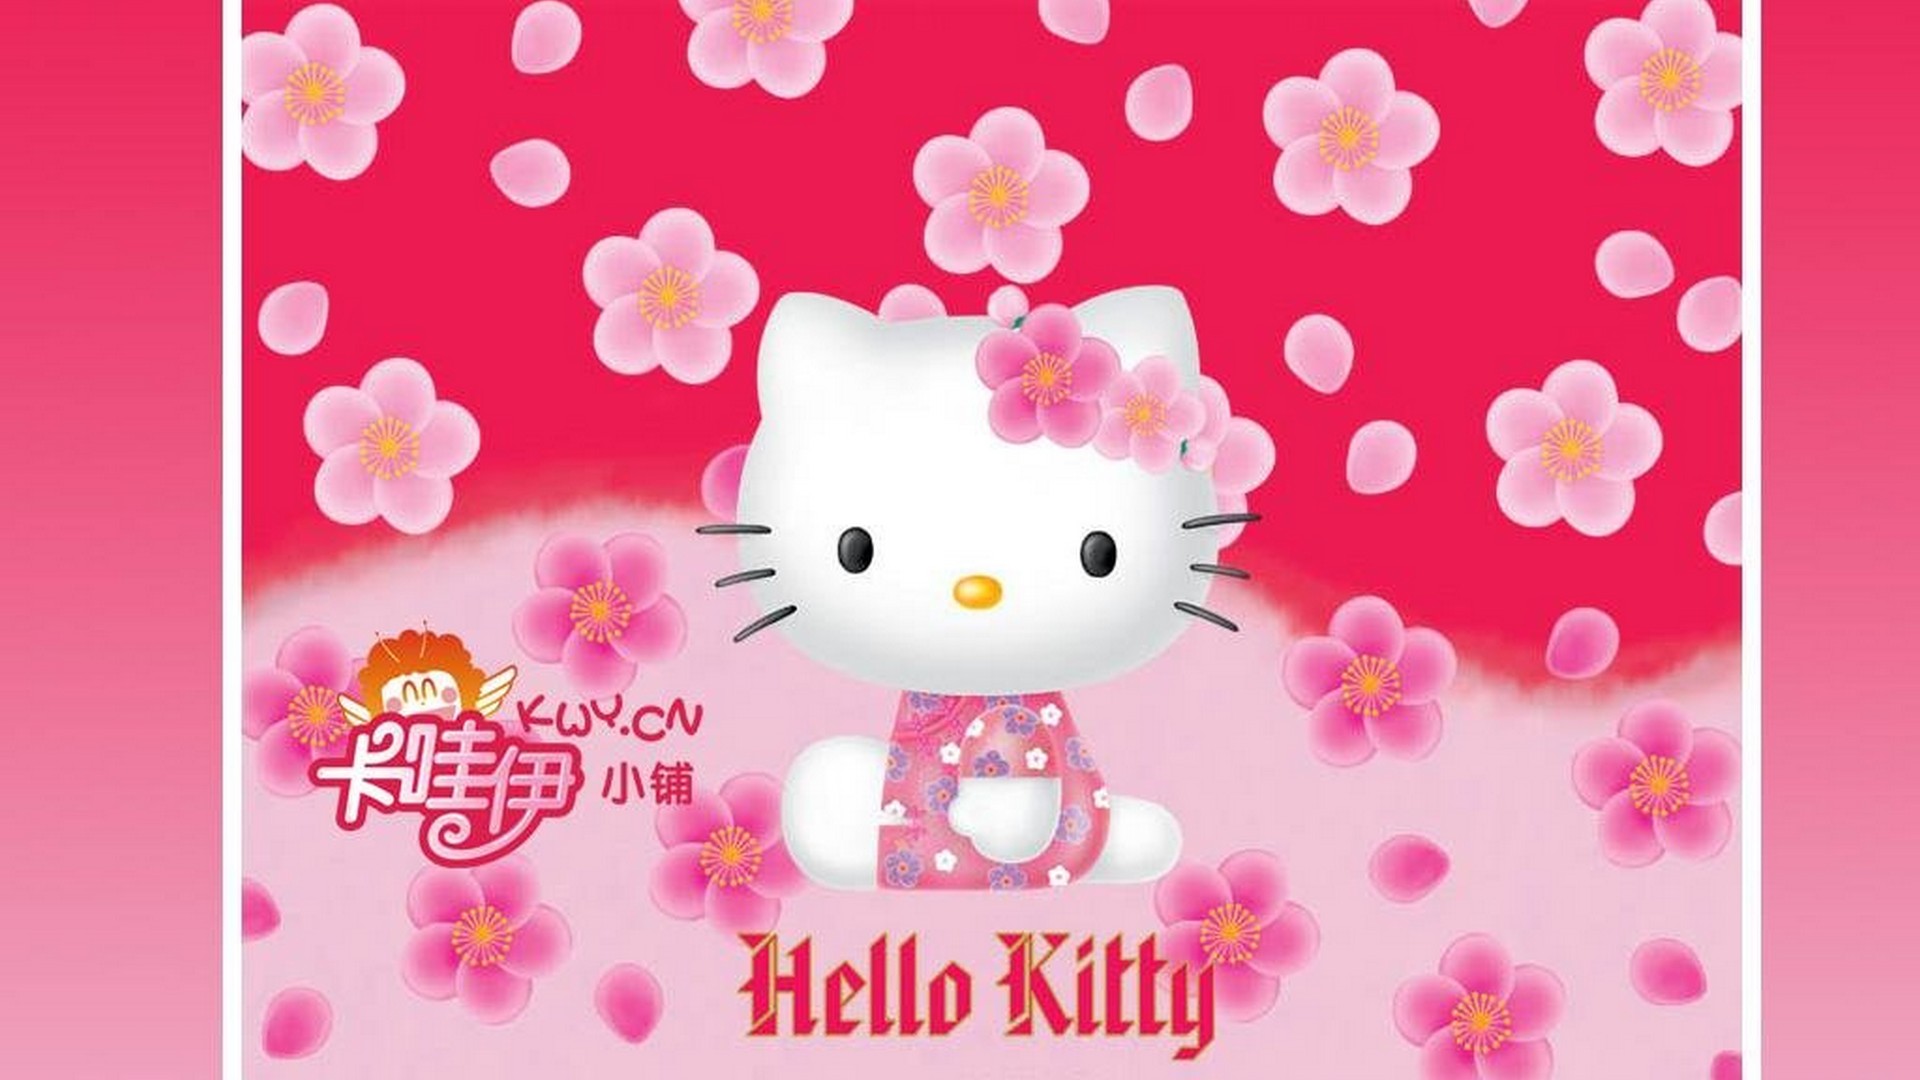 Desktop Wallpaper Hello Kitty Characters with resolution 1920X1080 pixel. You can use this wallpaper as background for your desktop Computer Screensavers, Android or iPhone smartphones